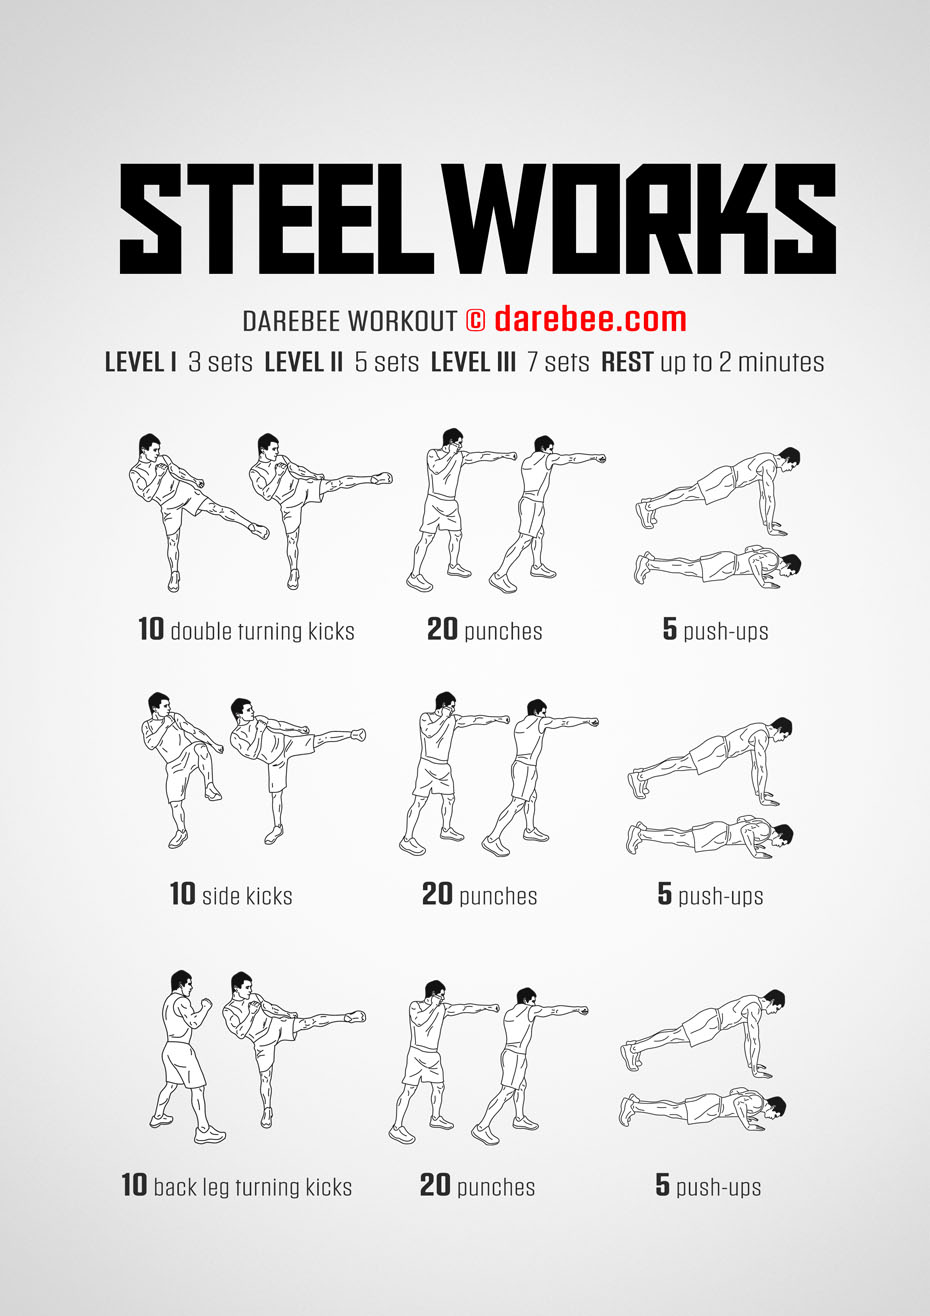 Steel Works is a DAREBEE total body strength home fitness video that helps you feel stronger and be healthier.